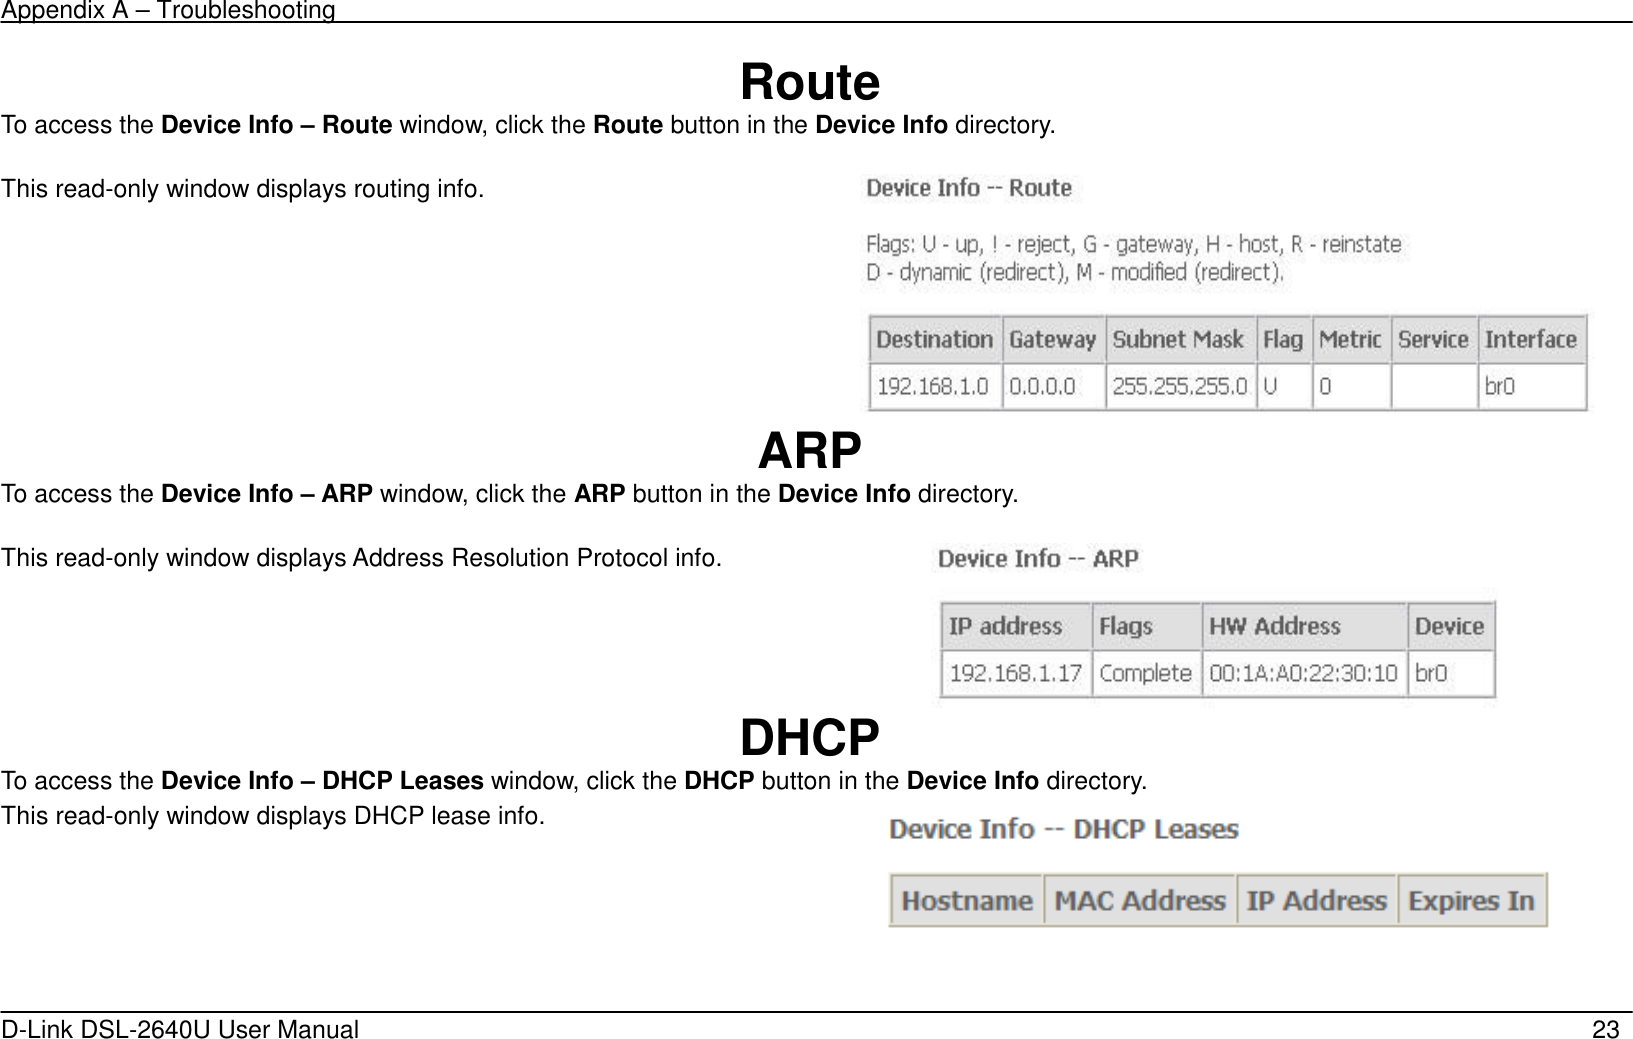 Appendix A – Troubleshooting   D-Link DSL-2640U User Manual    23 Route To access the Device Info – Route window, click the Route button in the Device Info directory.  This read-only window displays routing info.     ARP To access the Device Info – ARP window, click the ARP button in the Device Info directory.  This read-only window displays Address Resolution Protocol info.   DHCP To access the Device Info – DHCP Leases window, click the DHCP button in the Device Info directory. This read-only window displays DHCP lease info.    